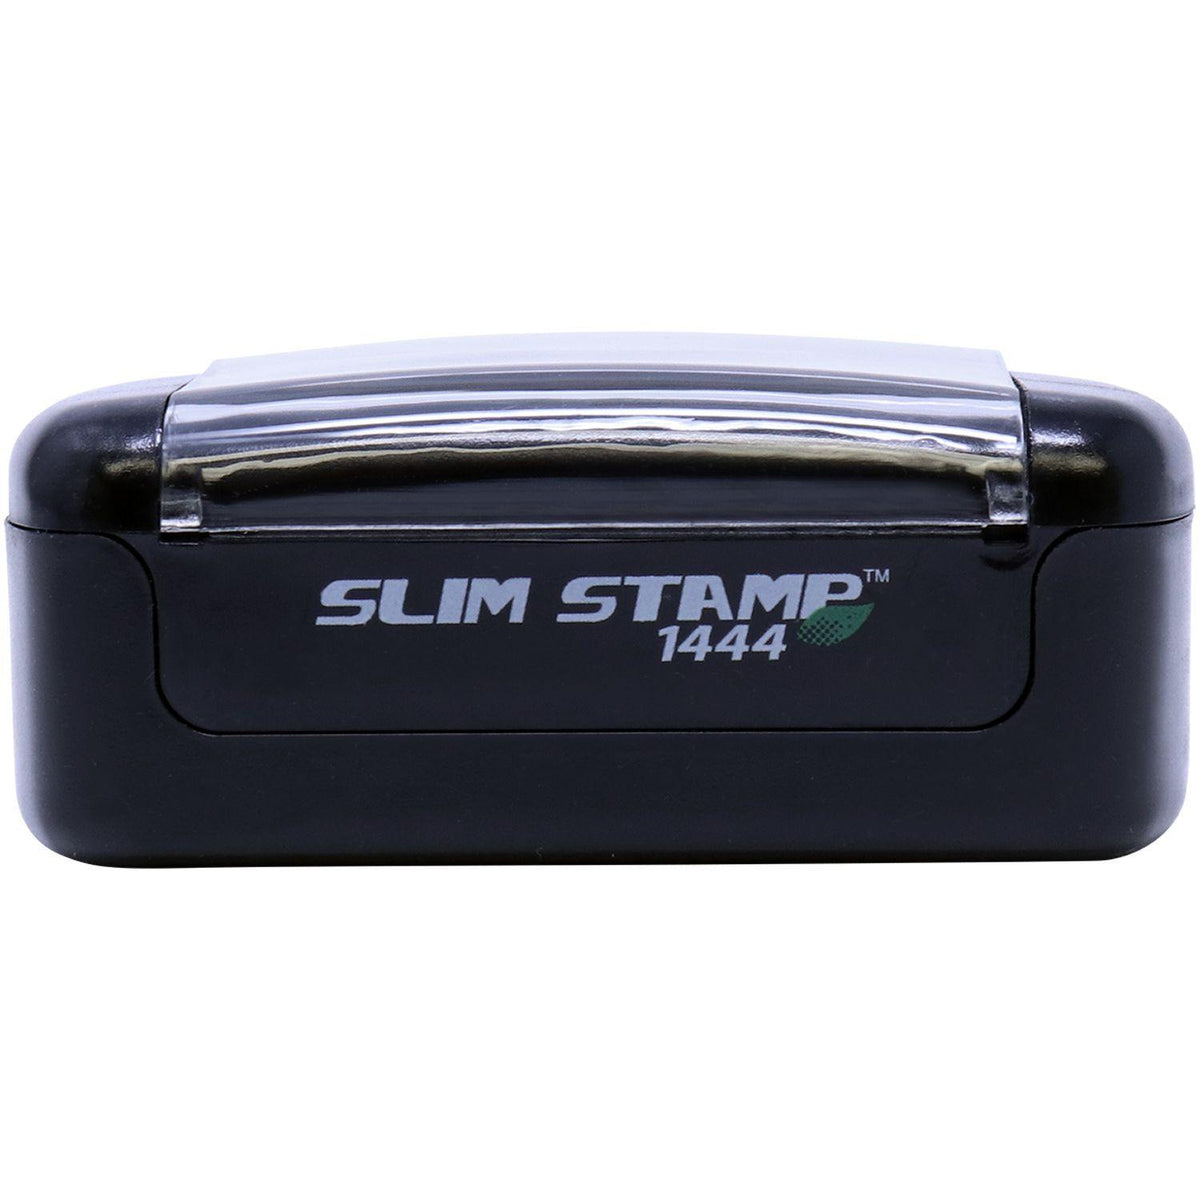 Slim Pre-Inked Asymptomatic Stamp - Engineer Seal Stamps - Brand_Slim, Impression Size_Small, Stamp Type_Pre-Inked Stamp, Type of Use_Medical Office